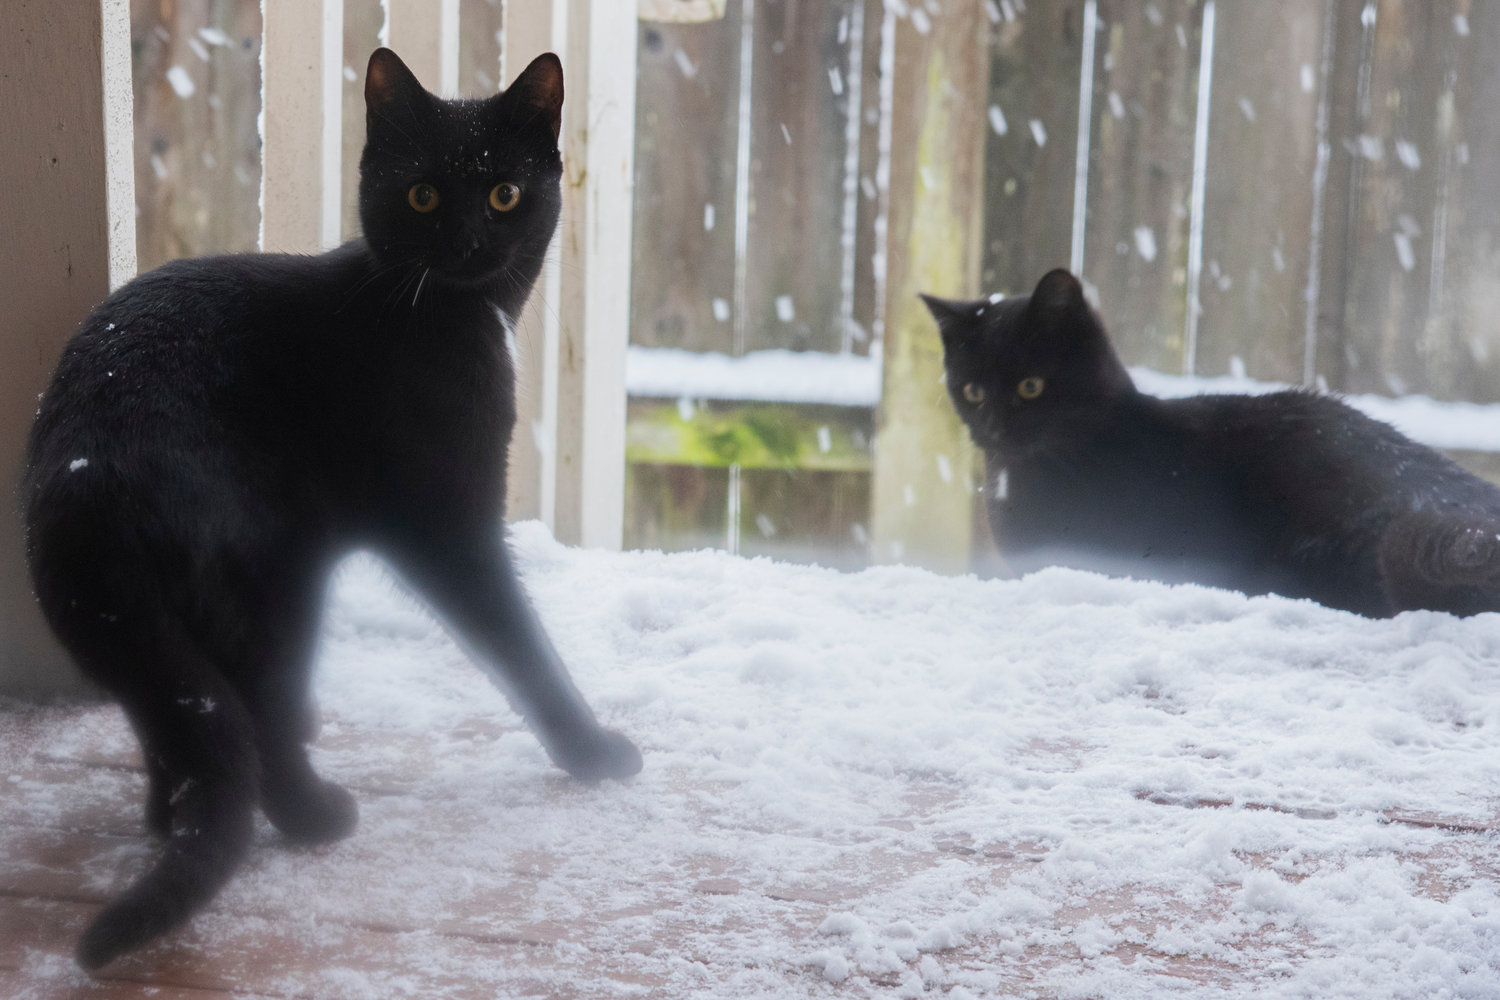 Stray kittens play in the snow Sunday in Chehalis.